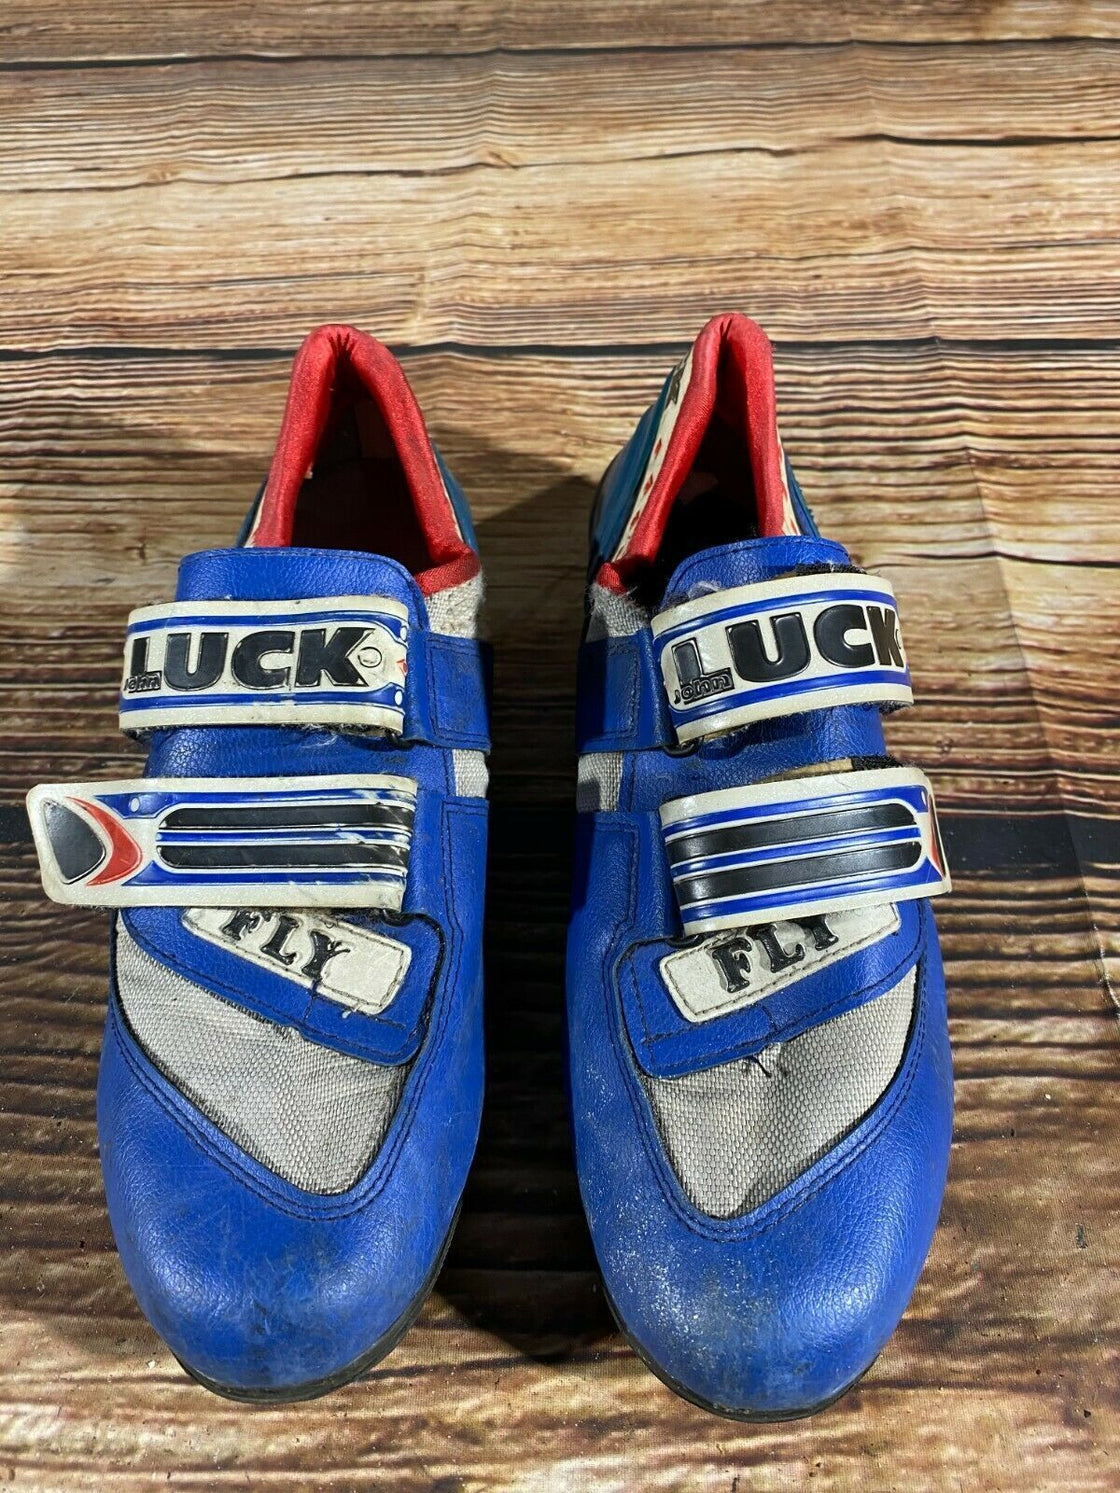 LUCK Fly Cycling Shoes Vintage MTB Mountain Biking Boots Size EU42 US9 SPD